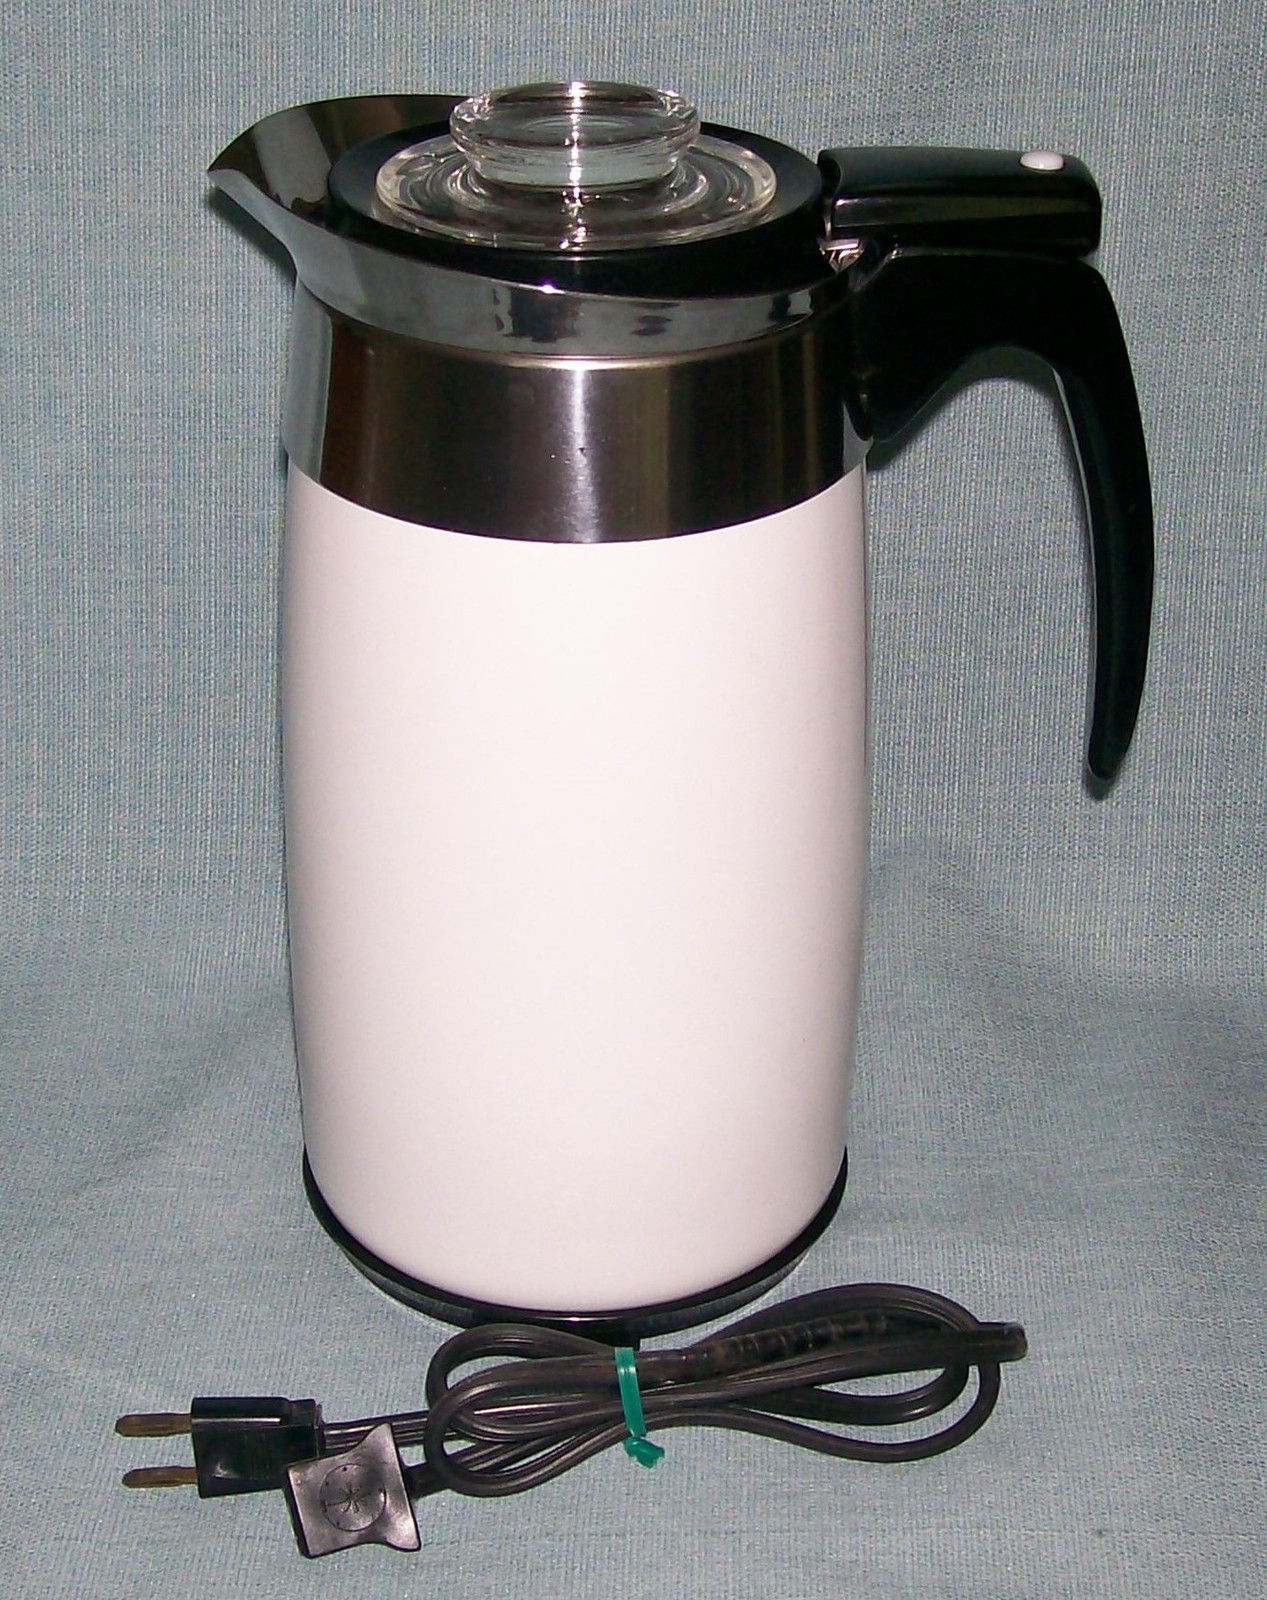 https://images-worker.bonanzastatic.com/afu/images/c928/835d/3652_10393024385/Corning_Ware_WINTER_FROST_WHITE_Electric_Coffee_Percolator_10_cup_P-280-EP_006.JPG